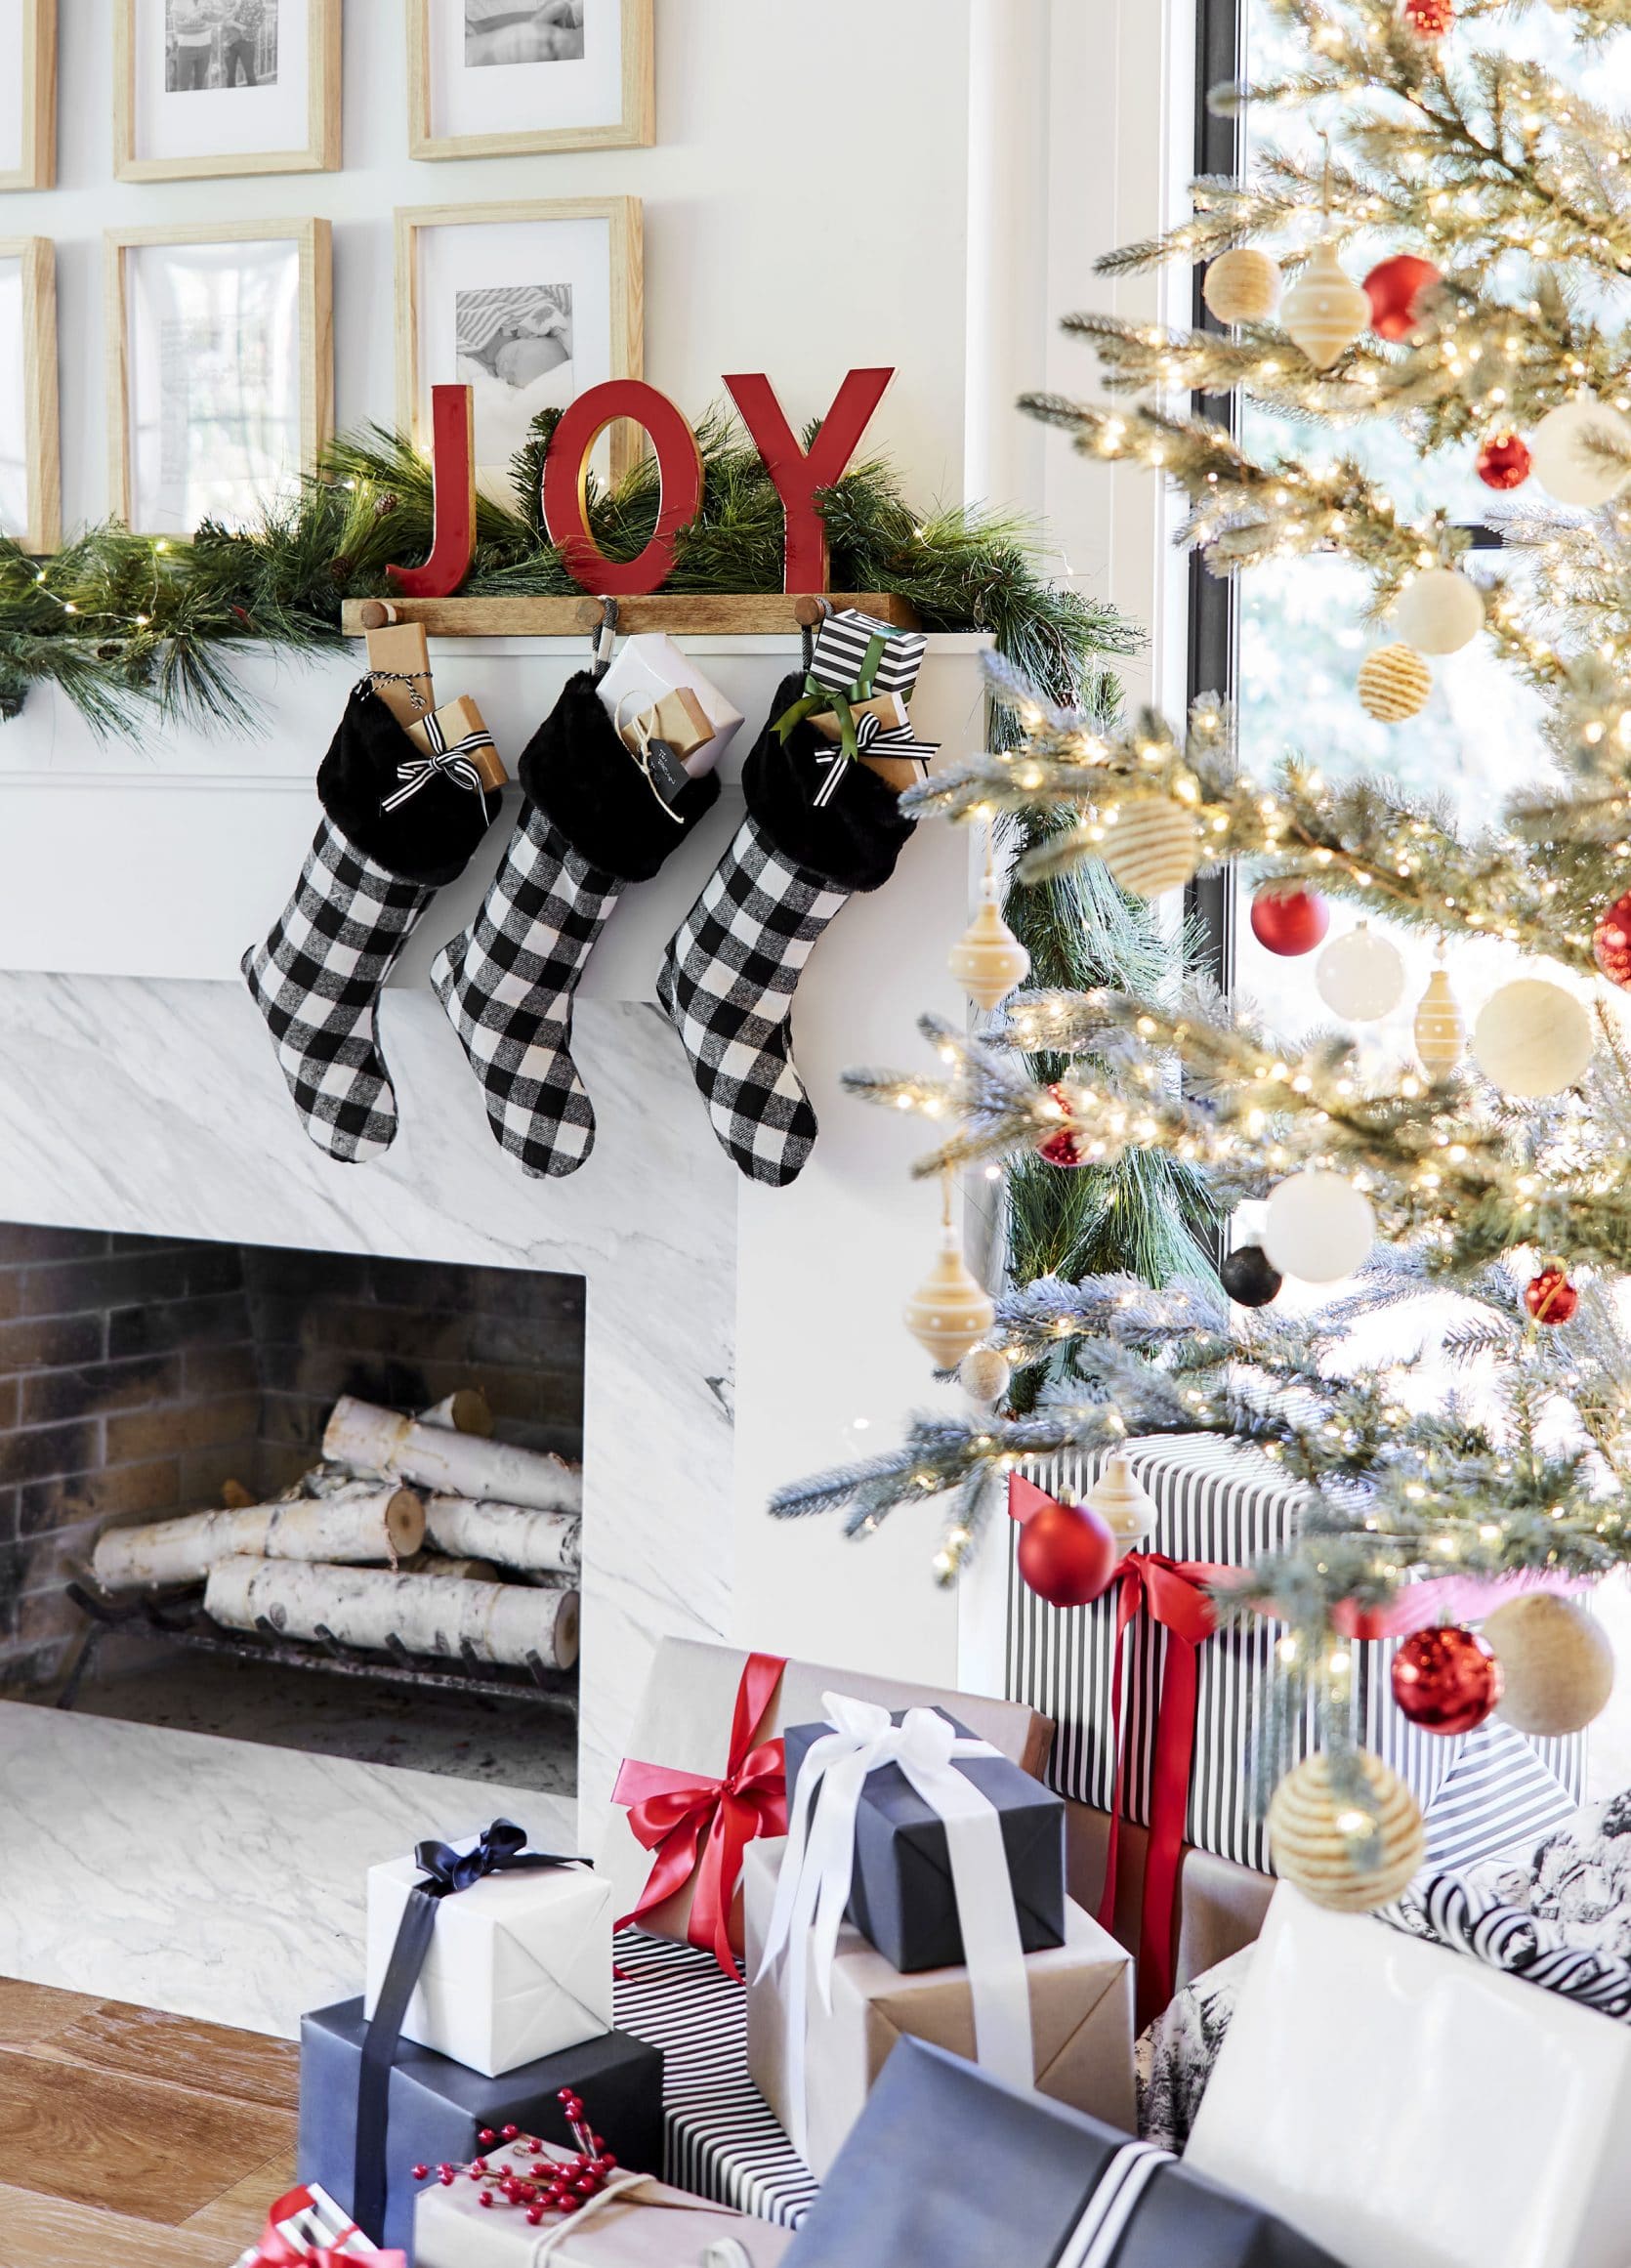 Tv Above Fireplace too High Elegant 14 Ideas for How to Hang & Style Your Stockings with or